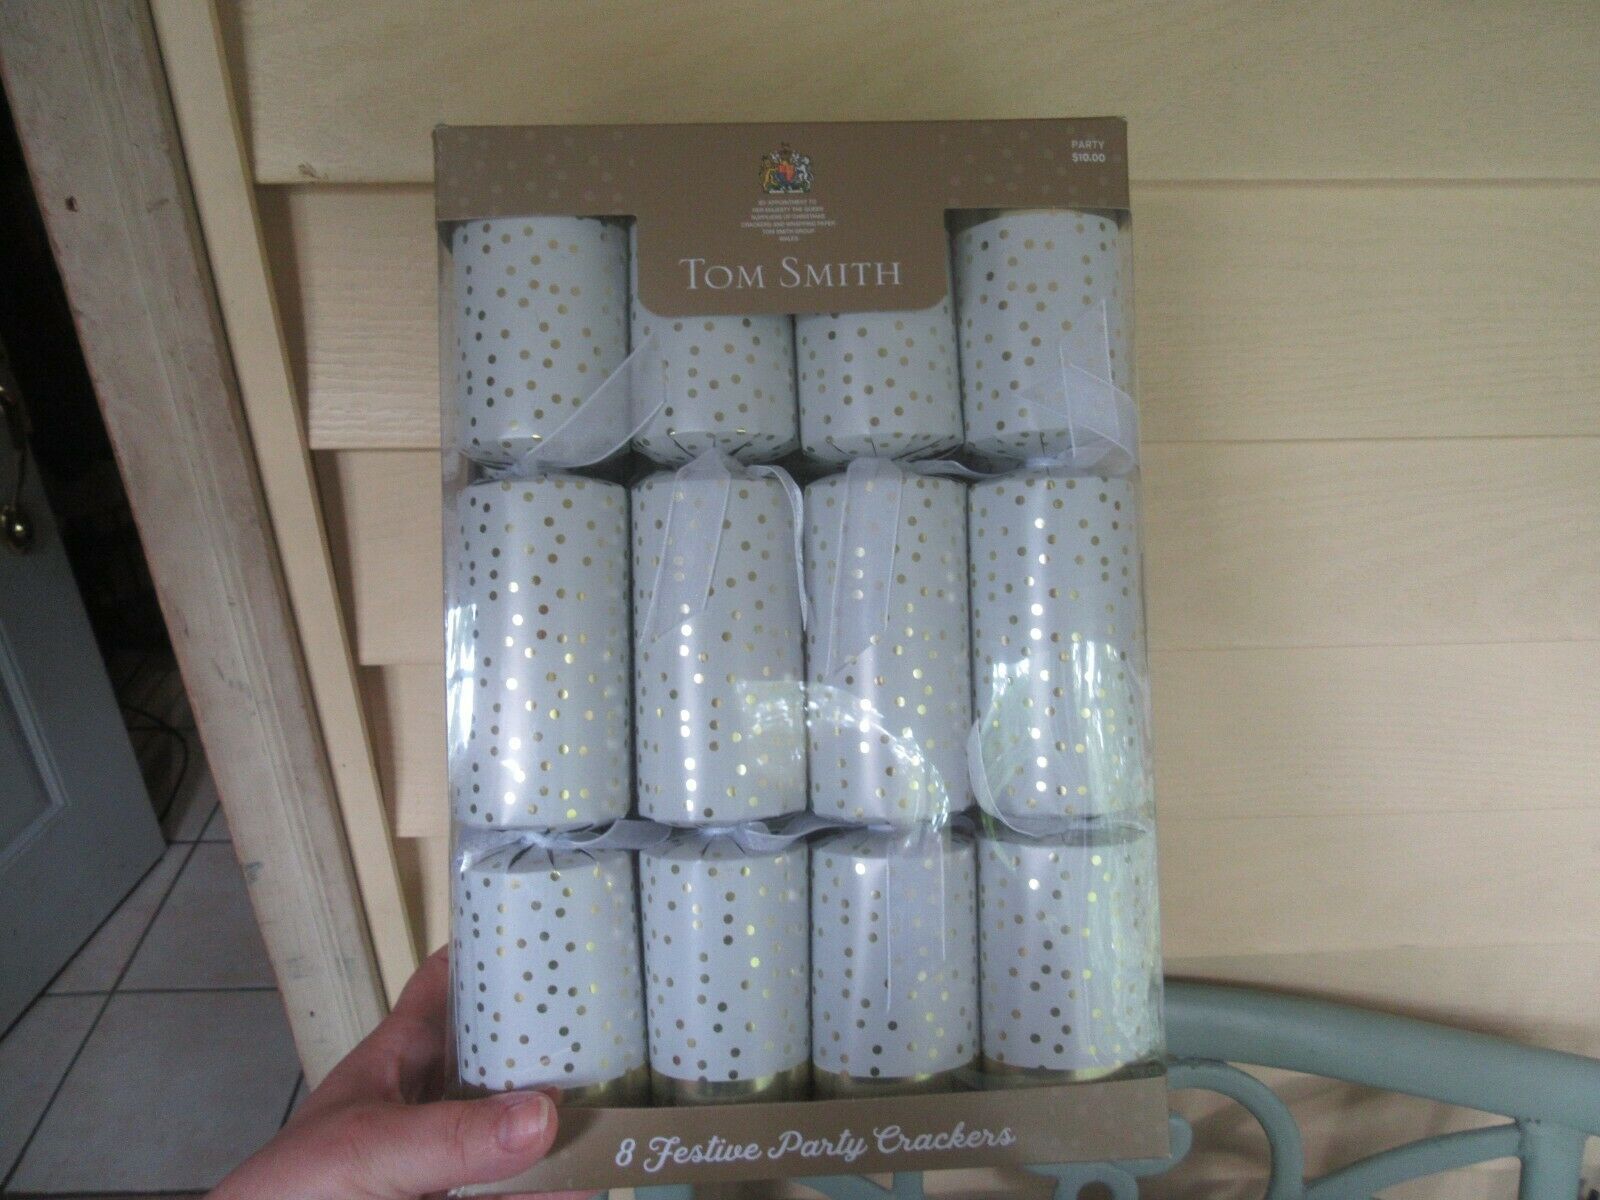 Tom Smith Festive Holiday Party Christmas Crackers White Dots 8 Pack 12"